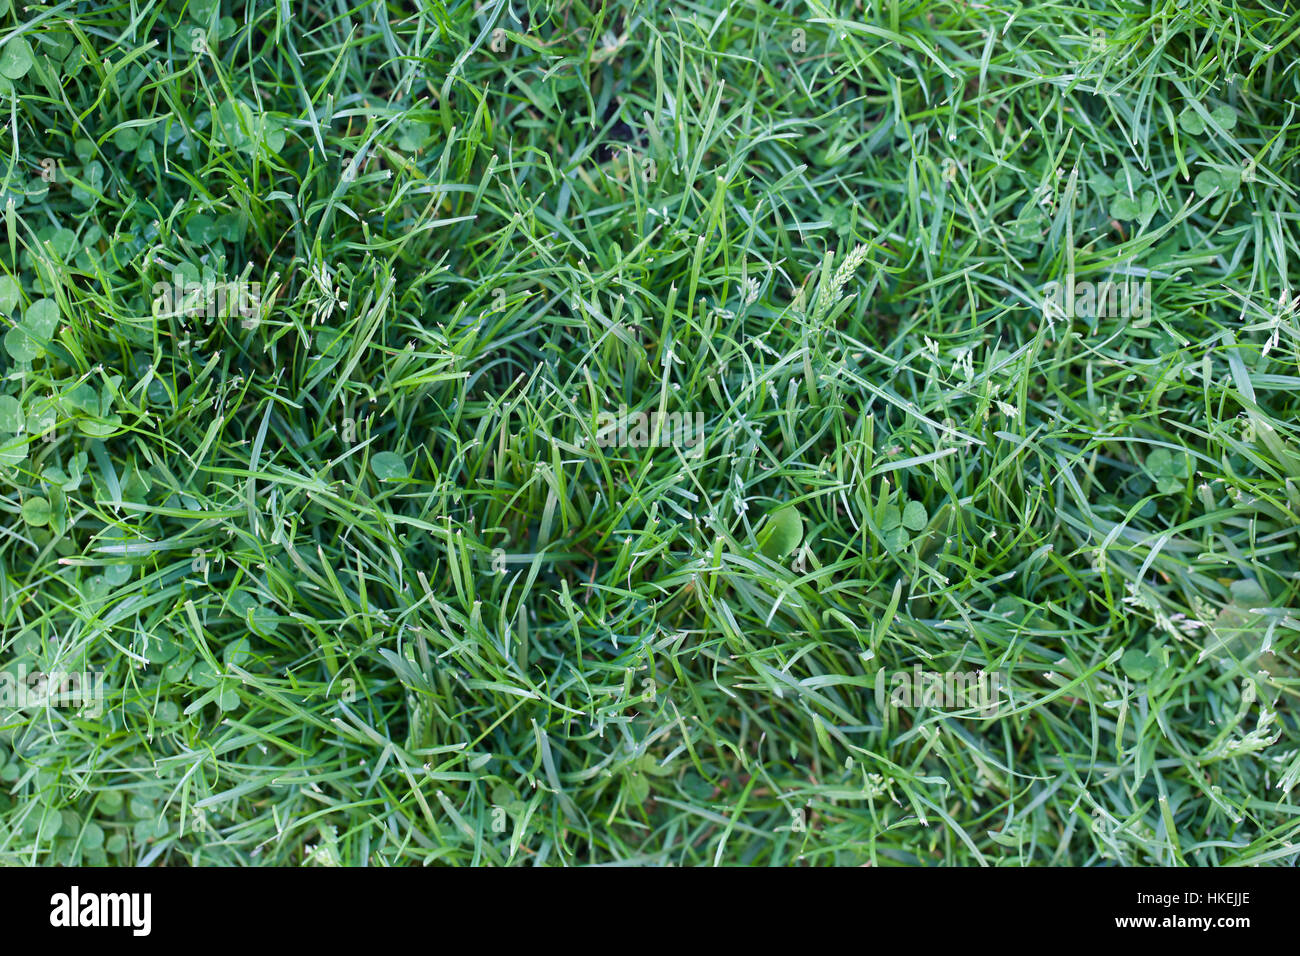 grass on forest floor. green, growth, nature, lush. Stock Photo